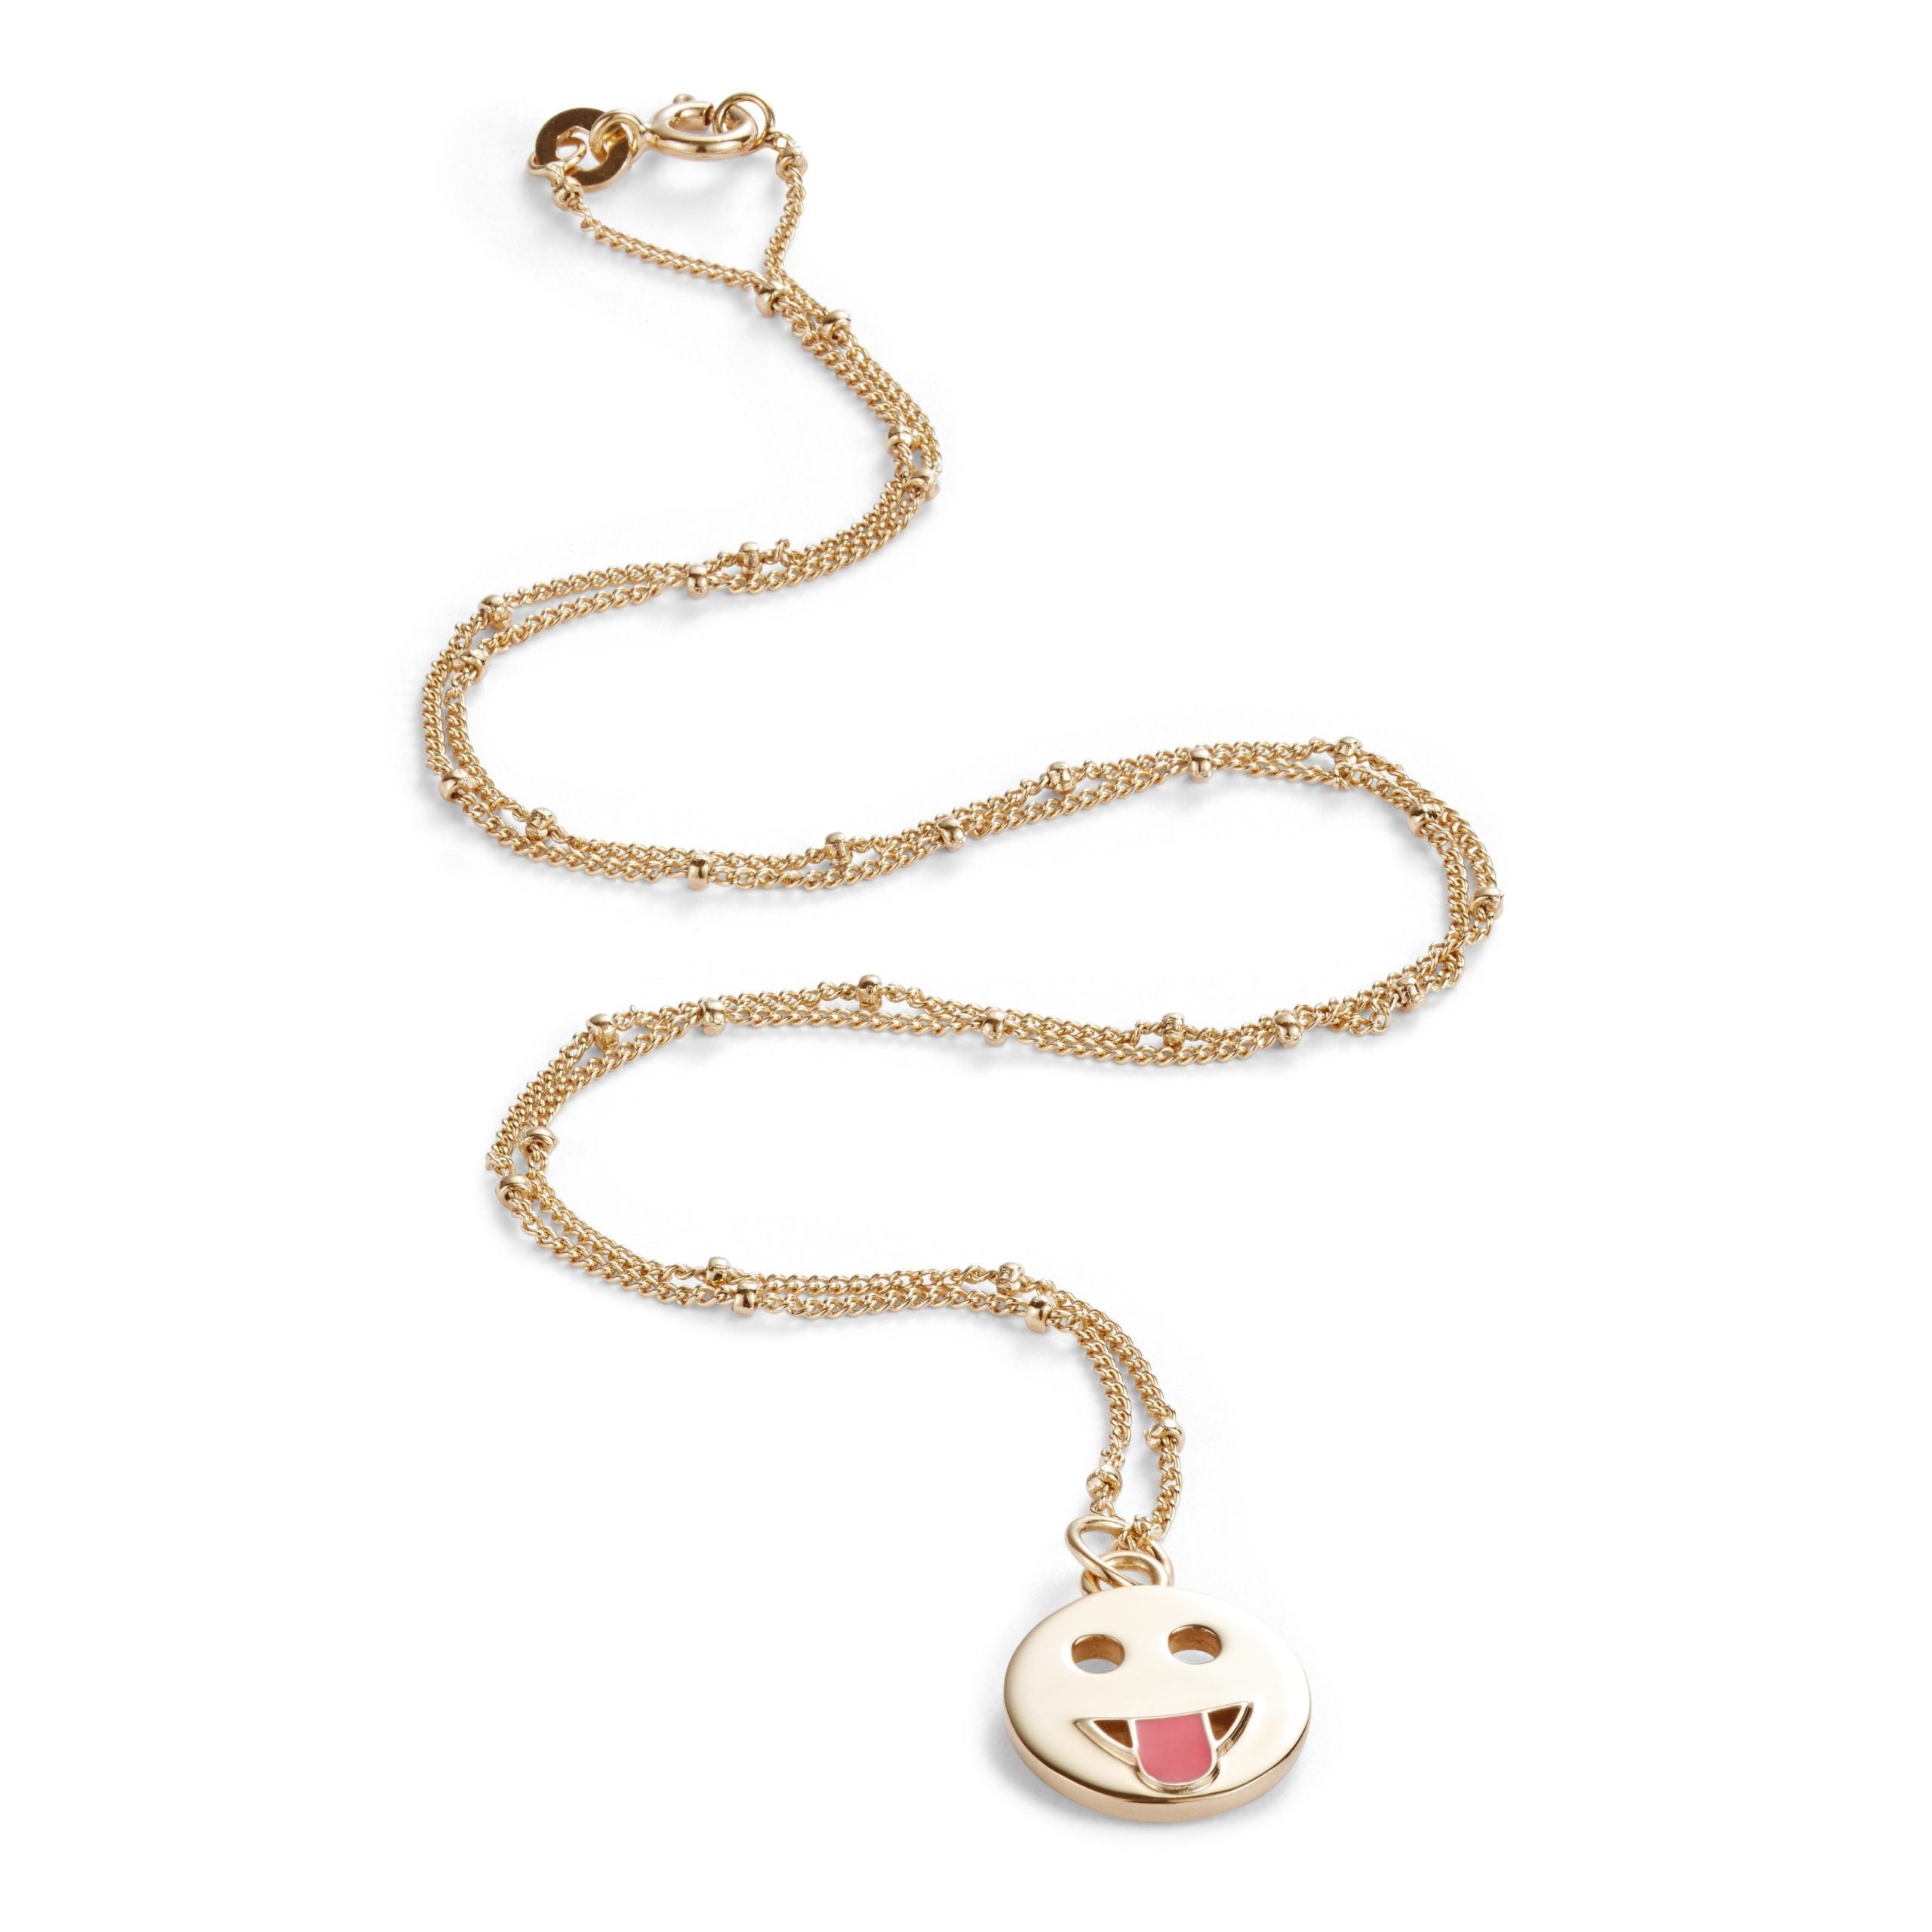 Tongue emoji necklace made of gold vermeil and pink enamel